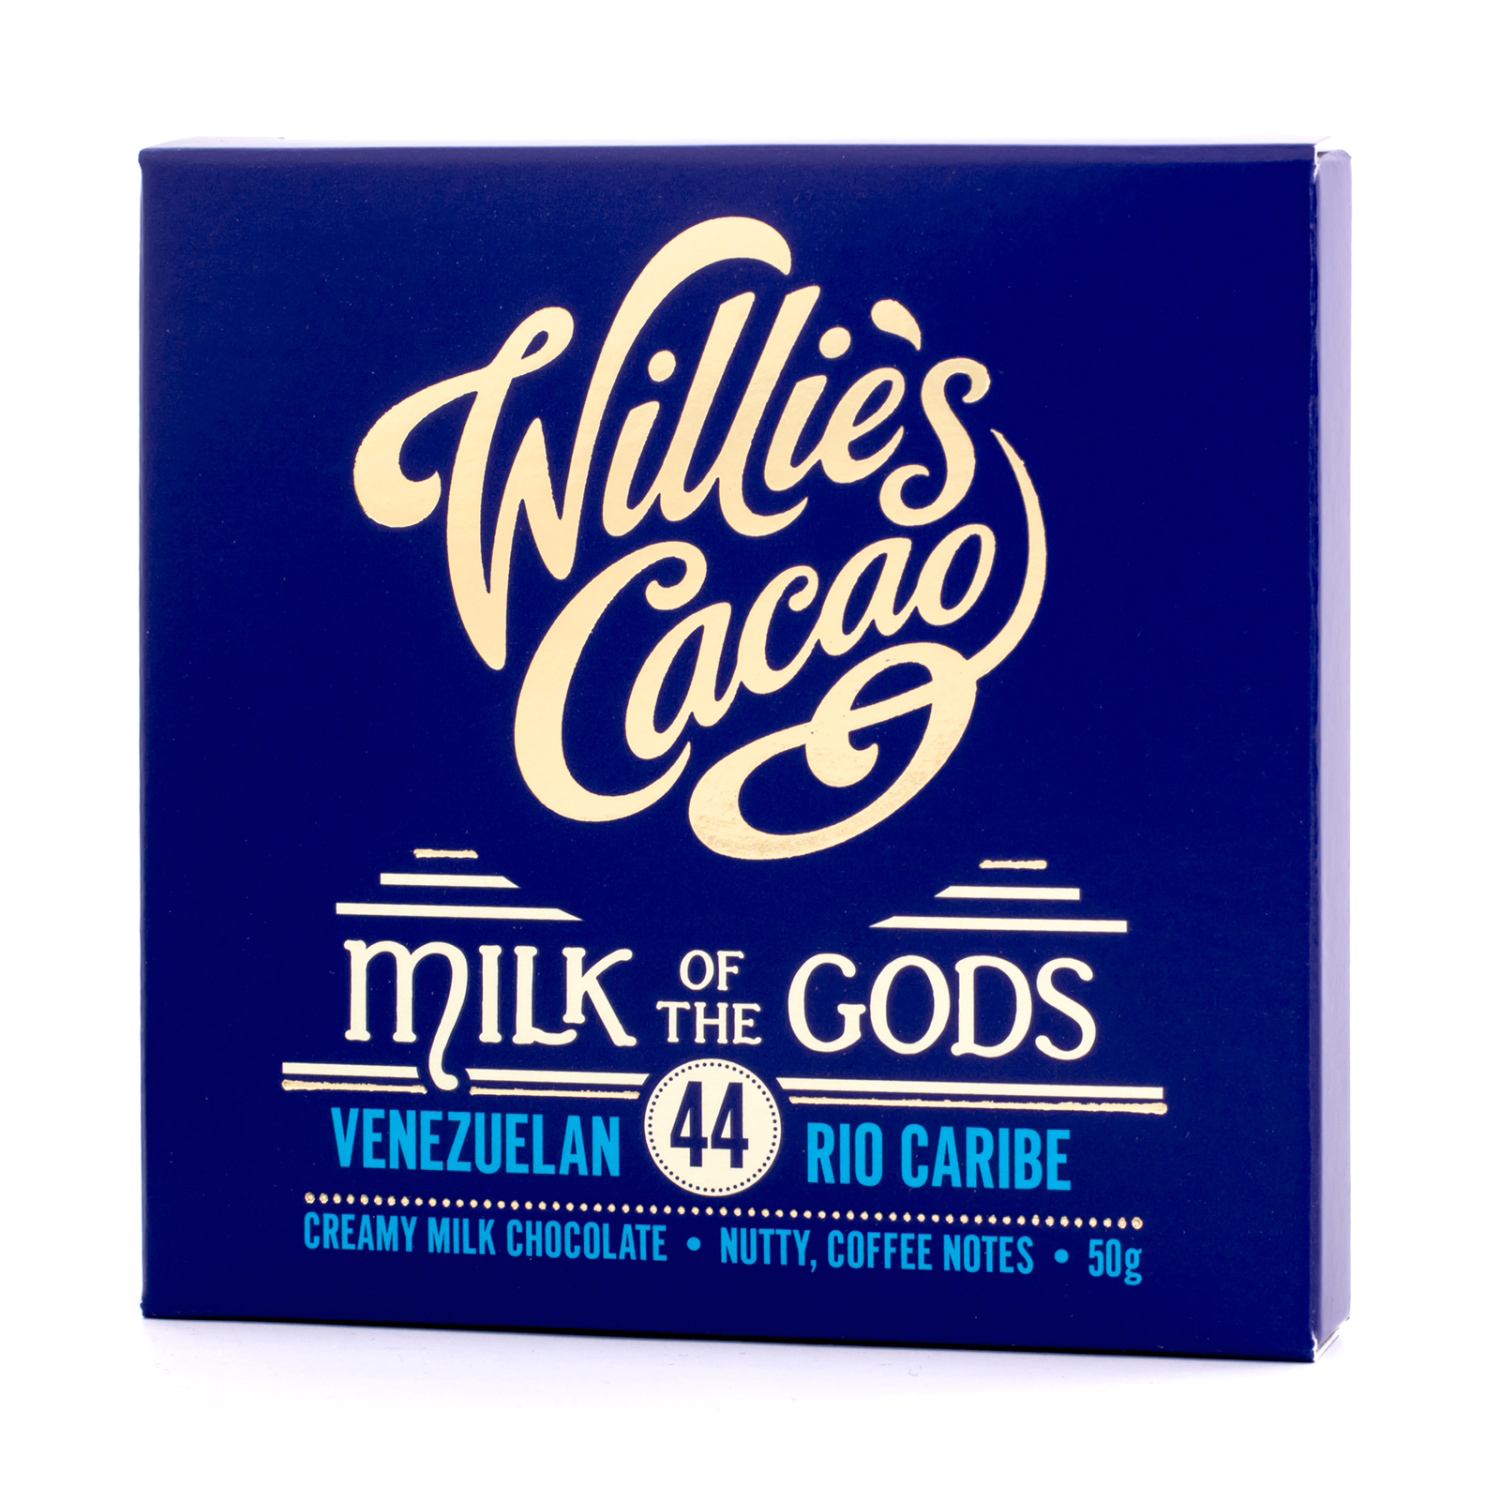 Willie's Cacao - Milk of the Gods 50g